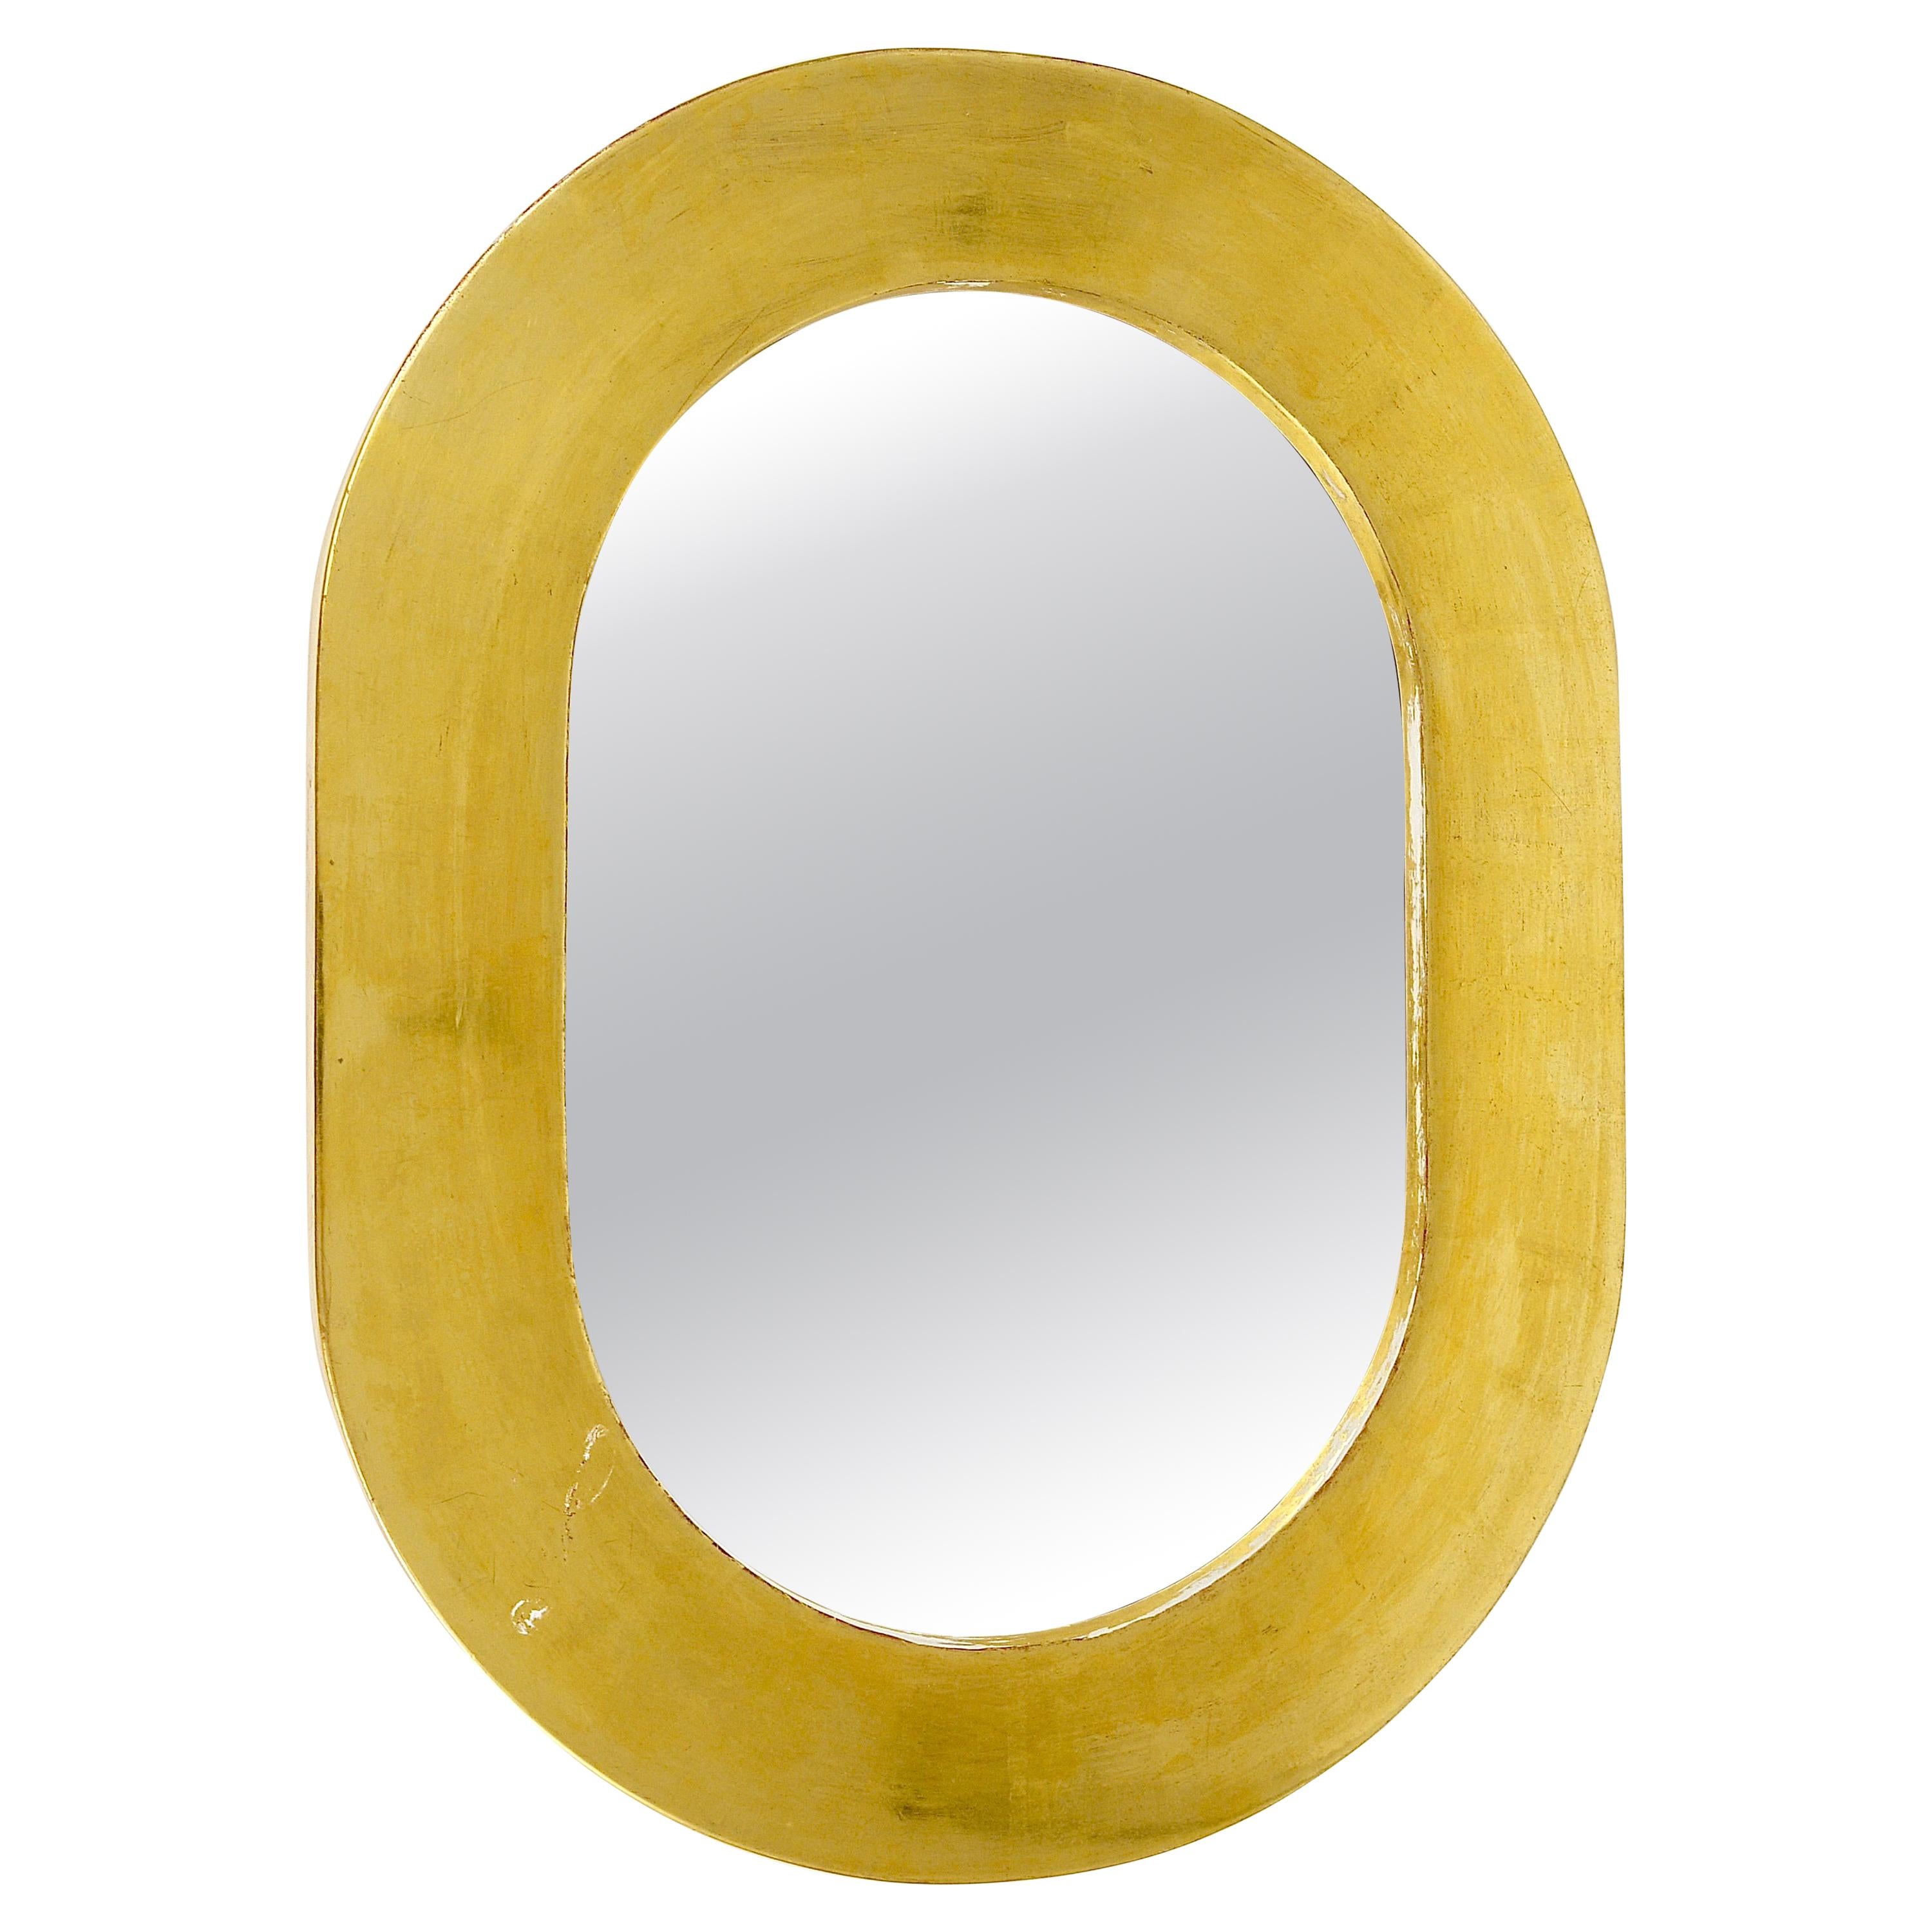 Carl Aubock Gold-Plated Midcentury Wall Mirror, Austria, 1960s For Sale